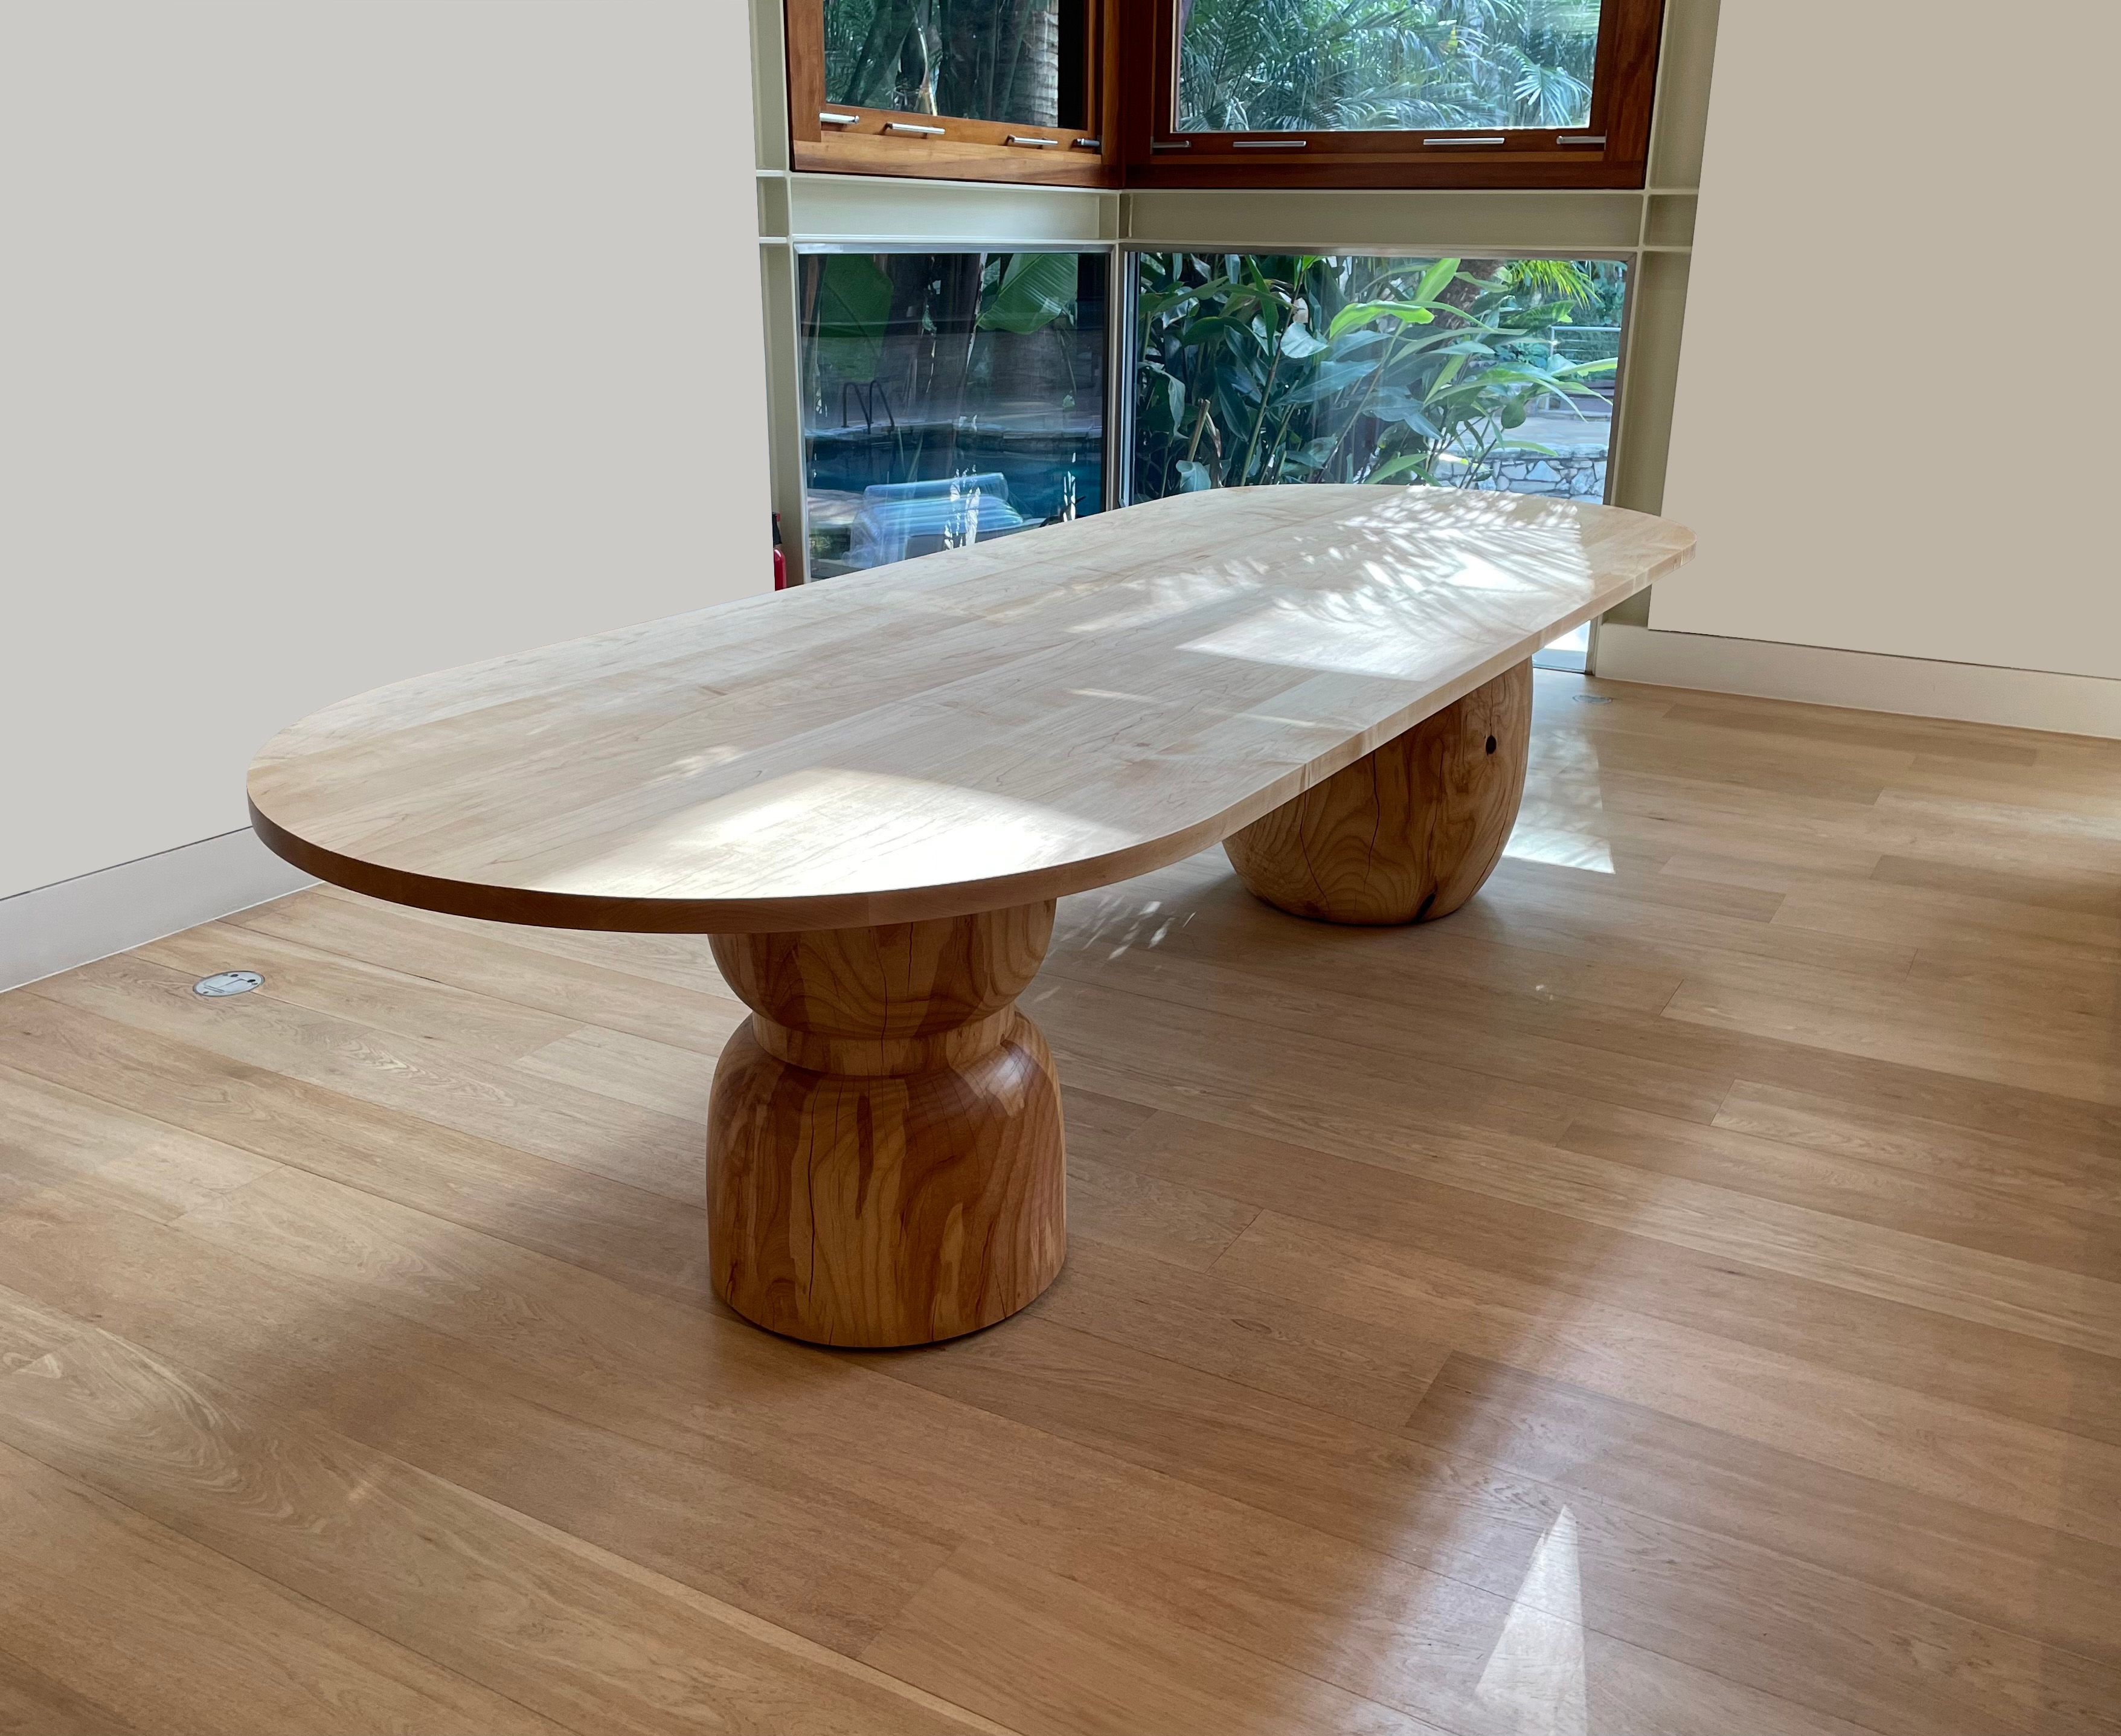  Totem Table product image 1